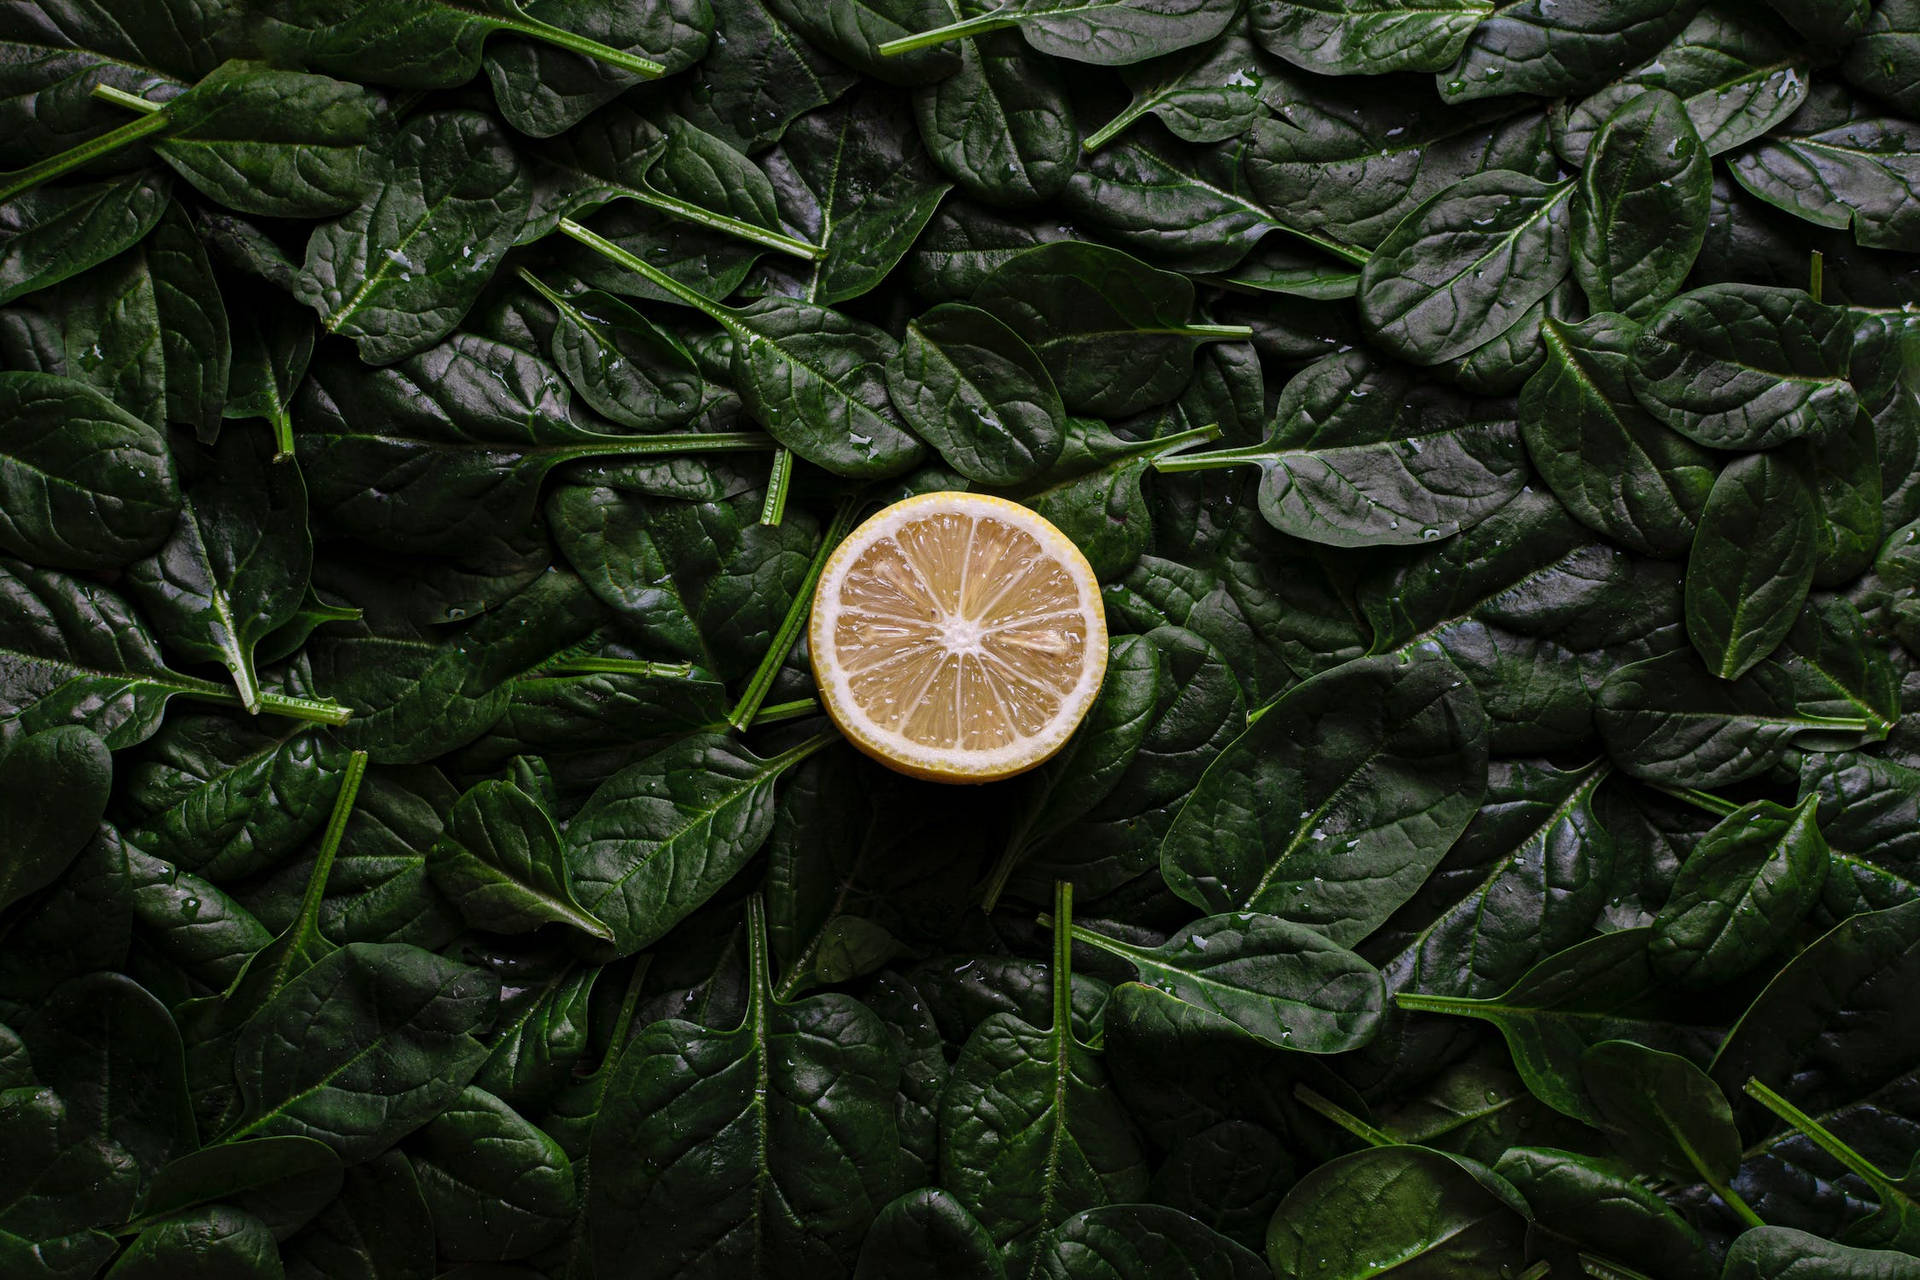 Lemon and Spinach Wallpaper